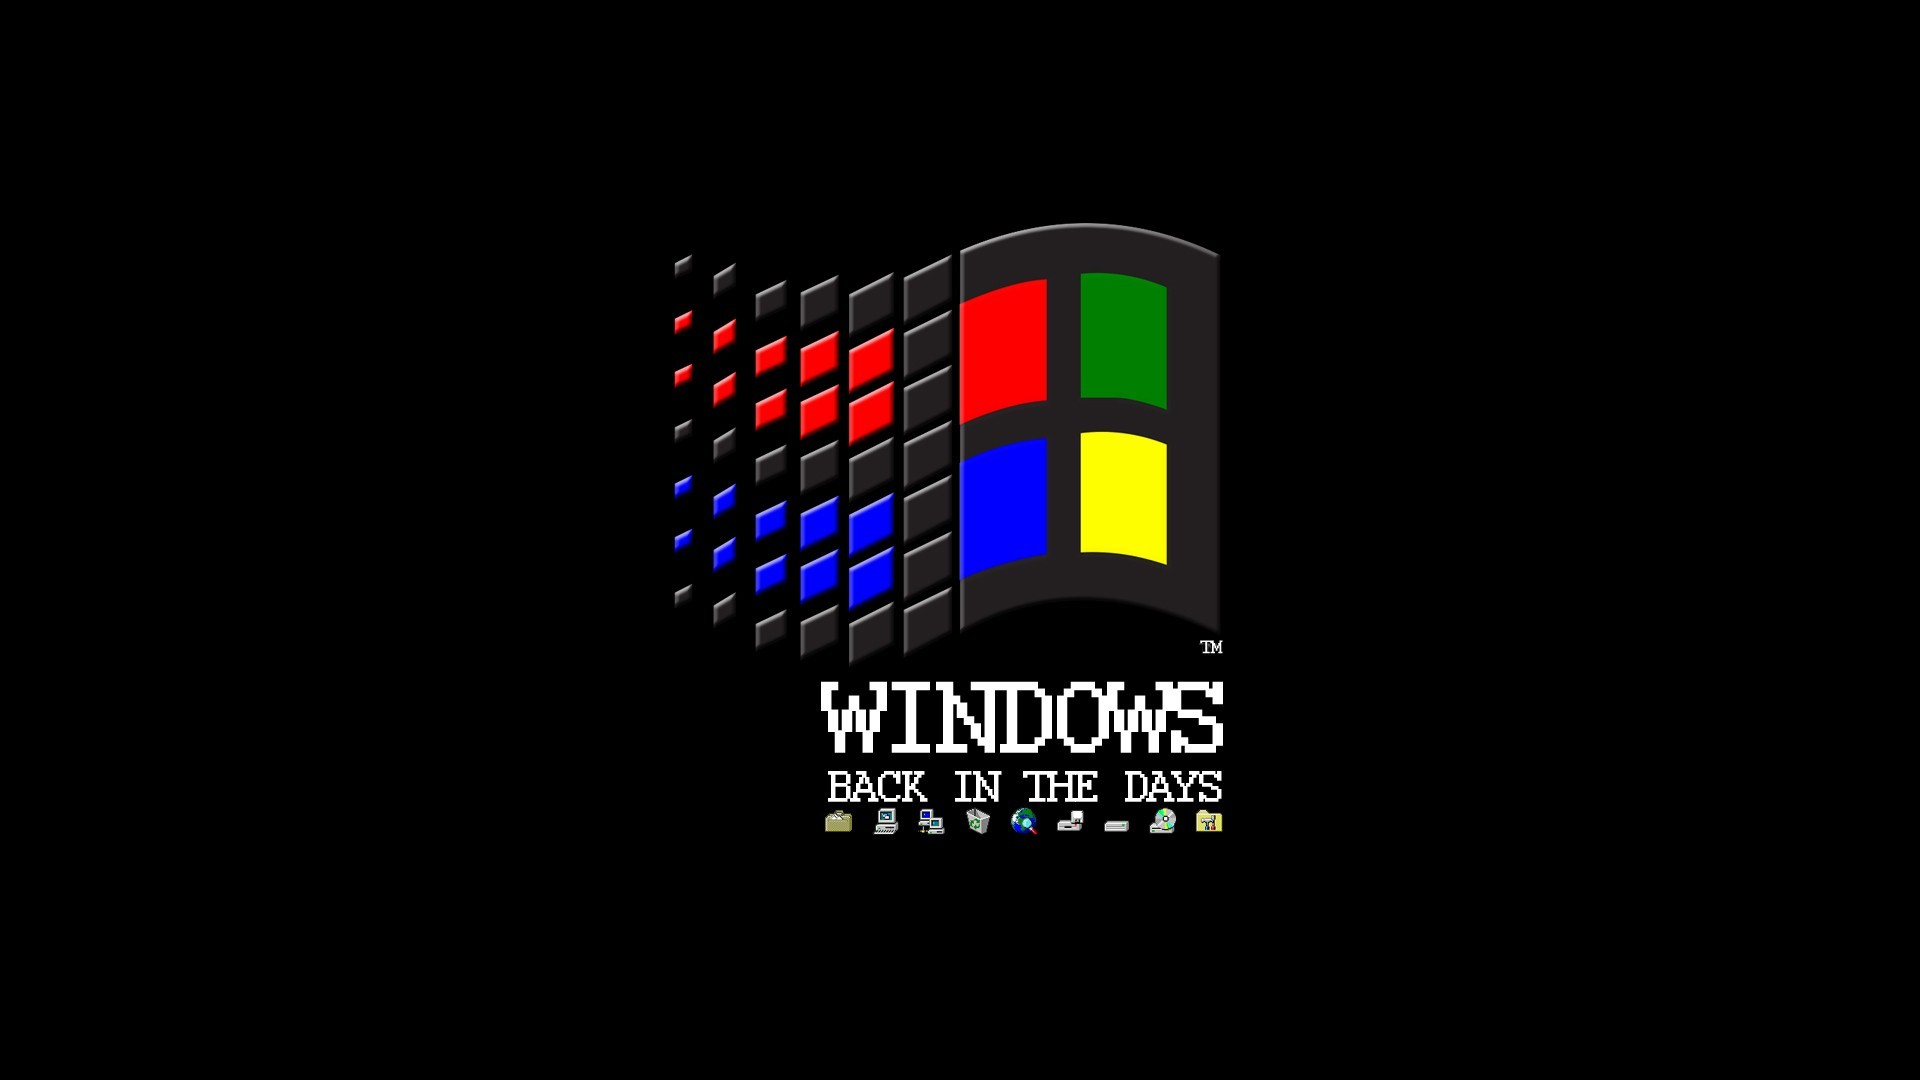 Old Windows Wallpapers 52 Images